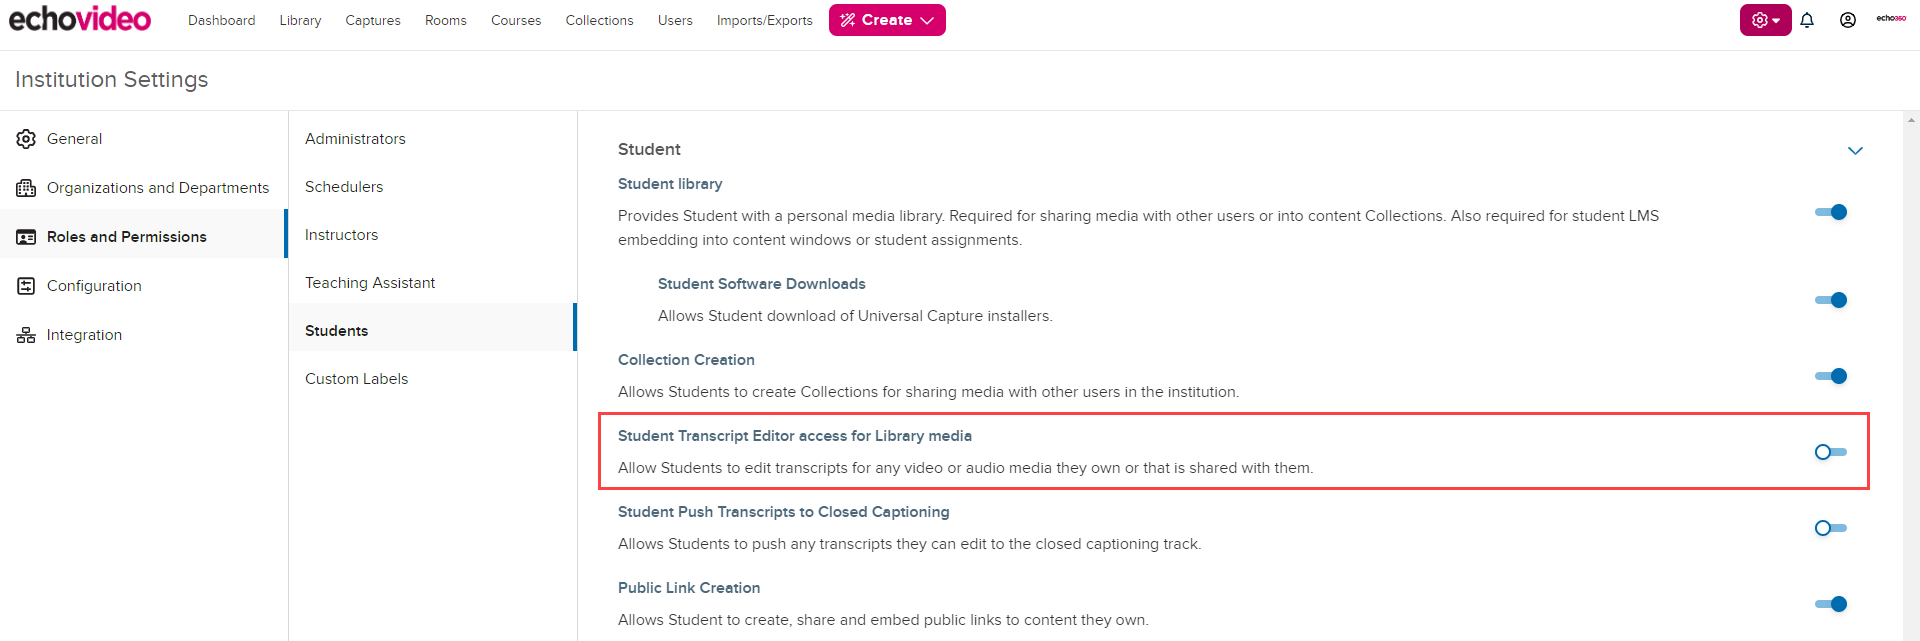 Roles and Permissions Student page and Student Transcript access to Library media option identified for steps as described